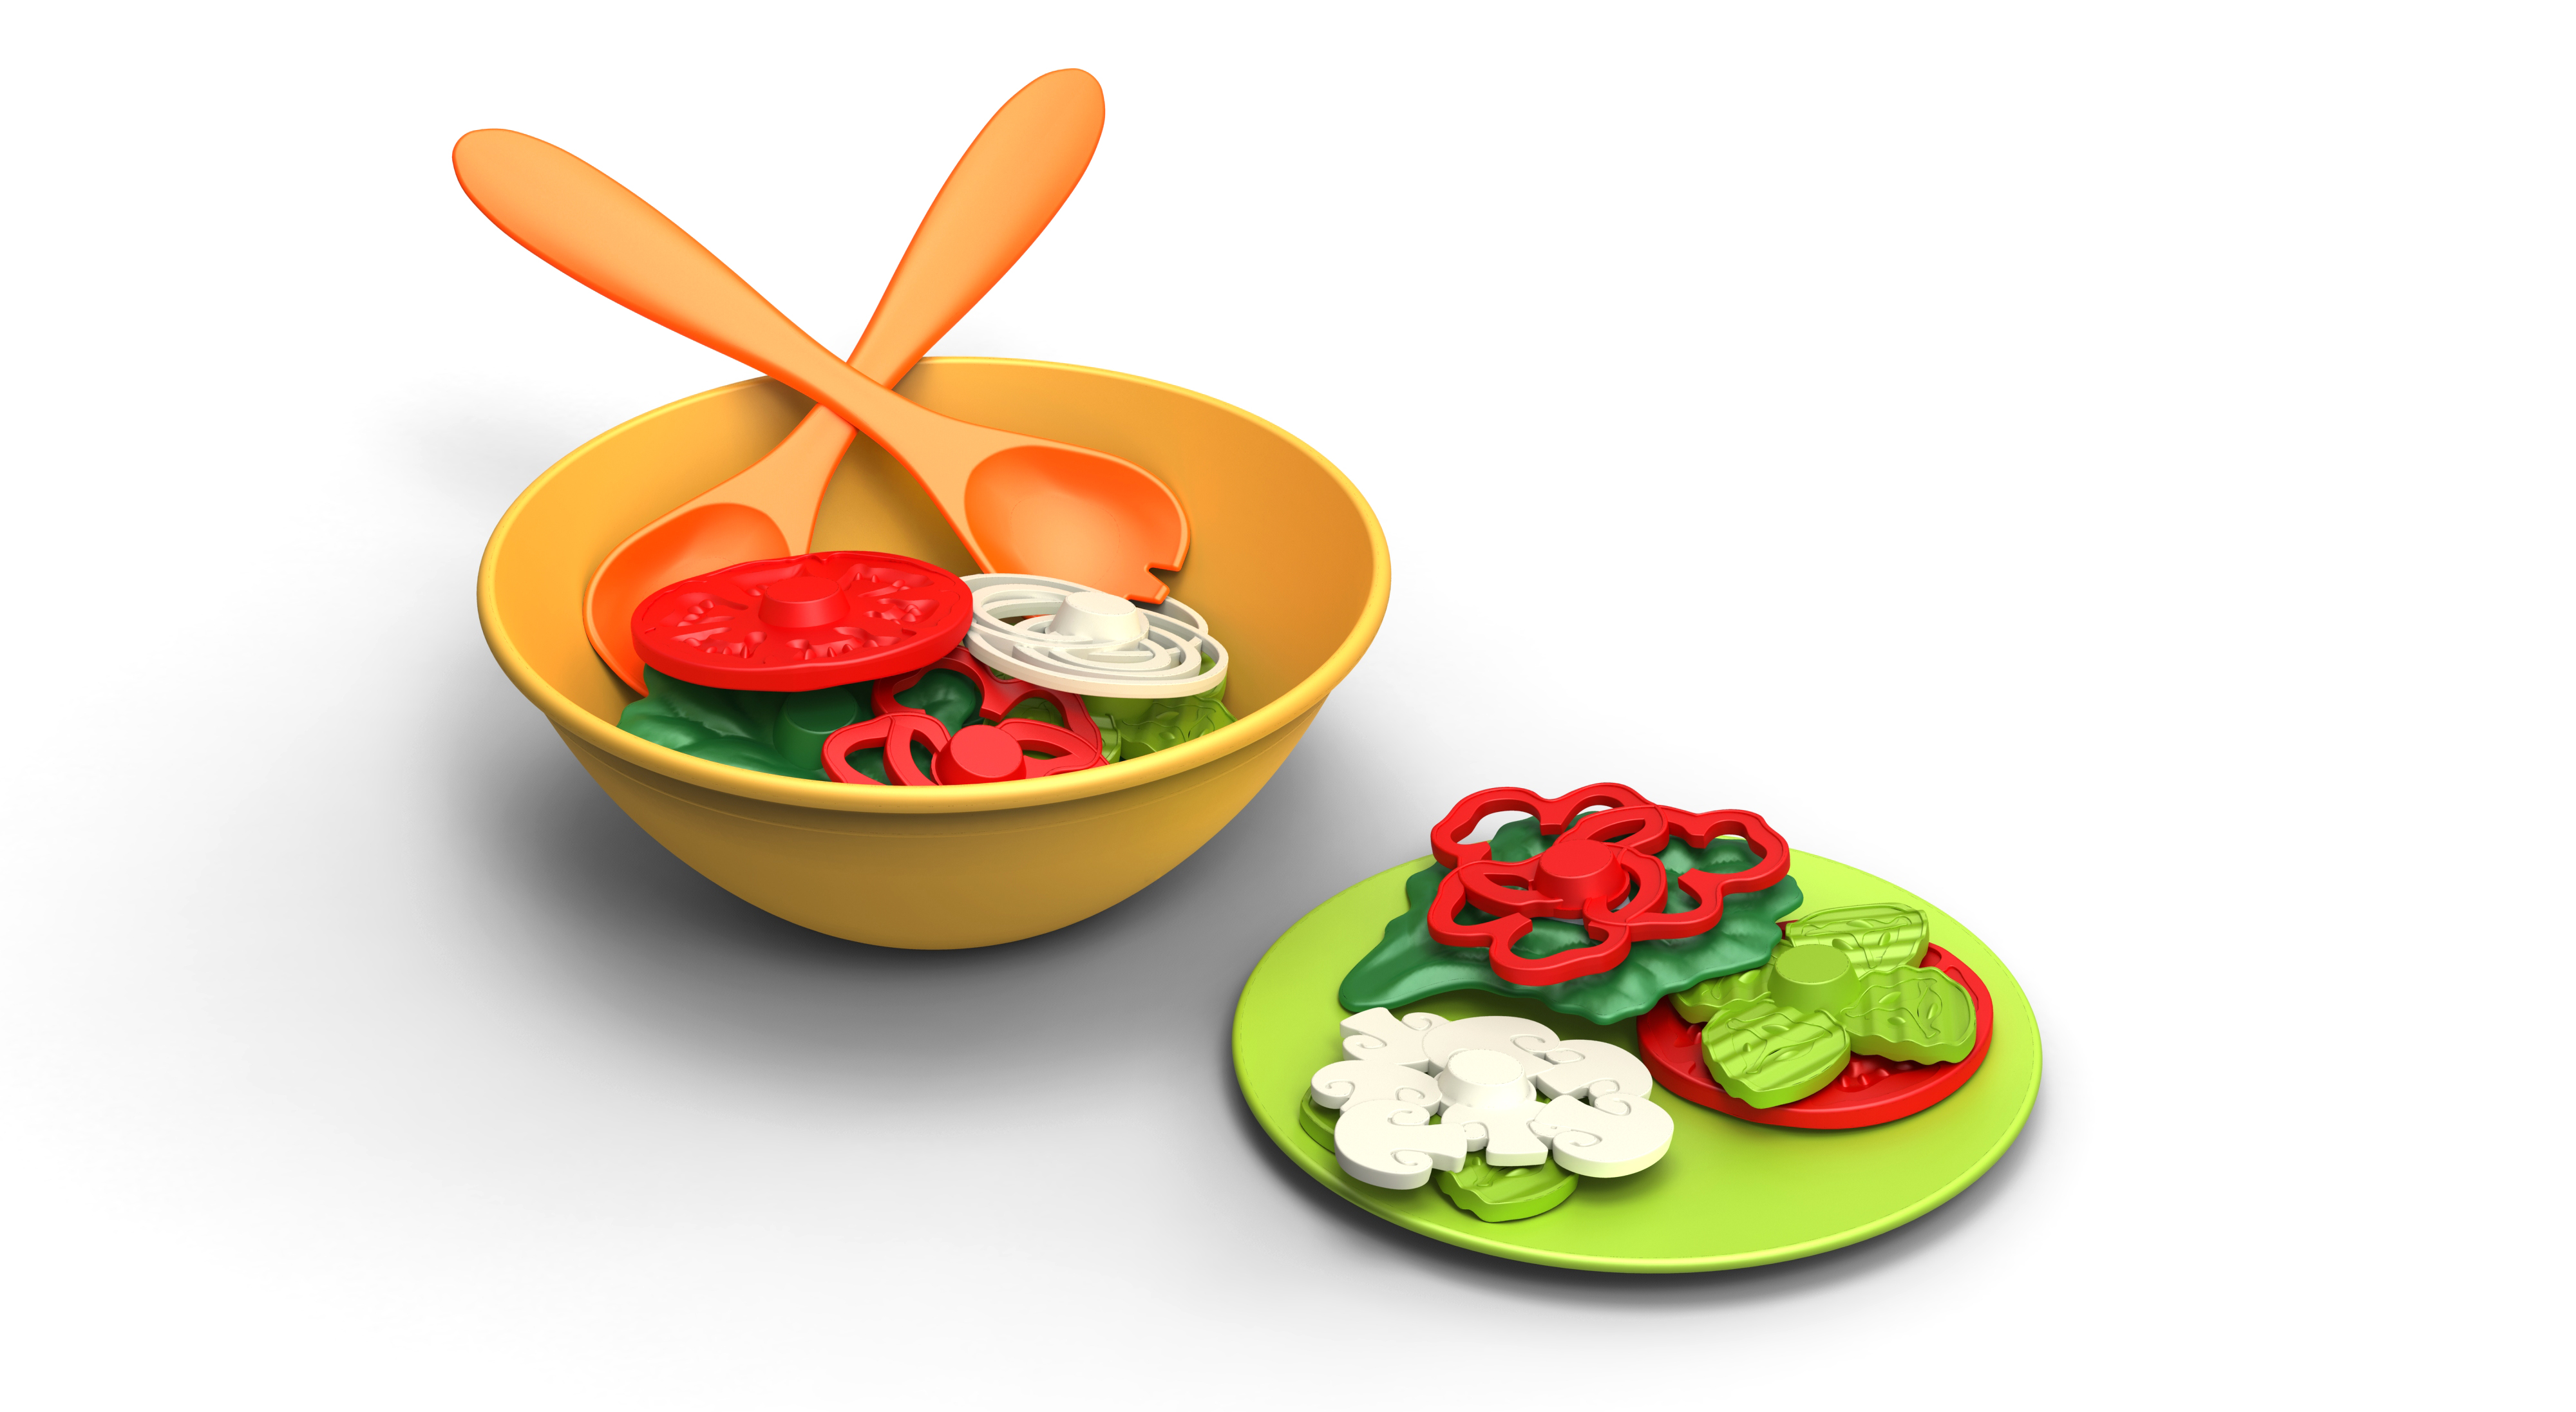 Salad Set by Green Toys Inc